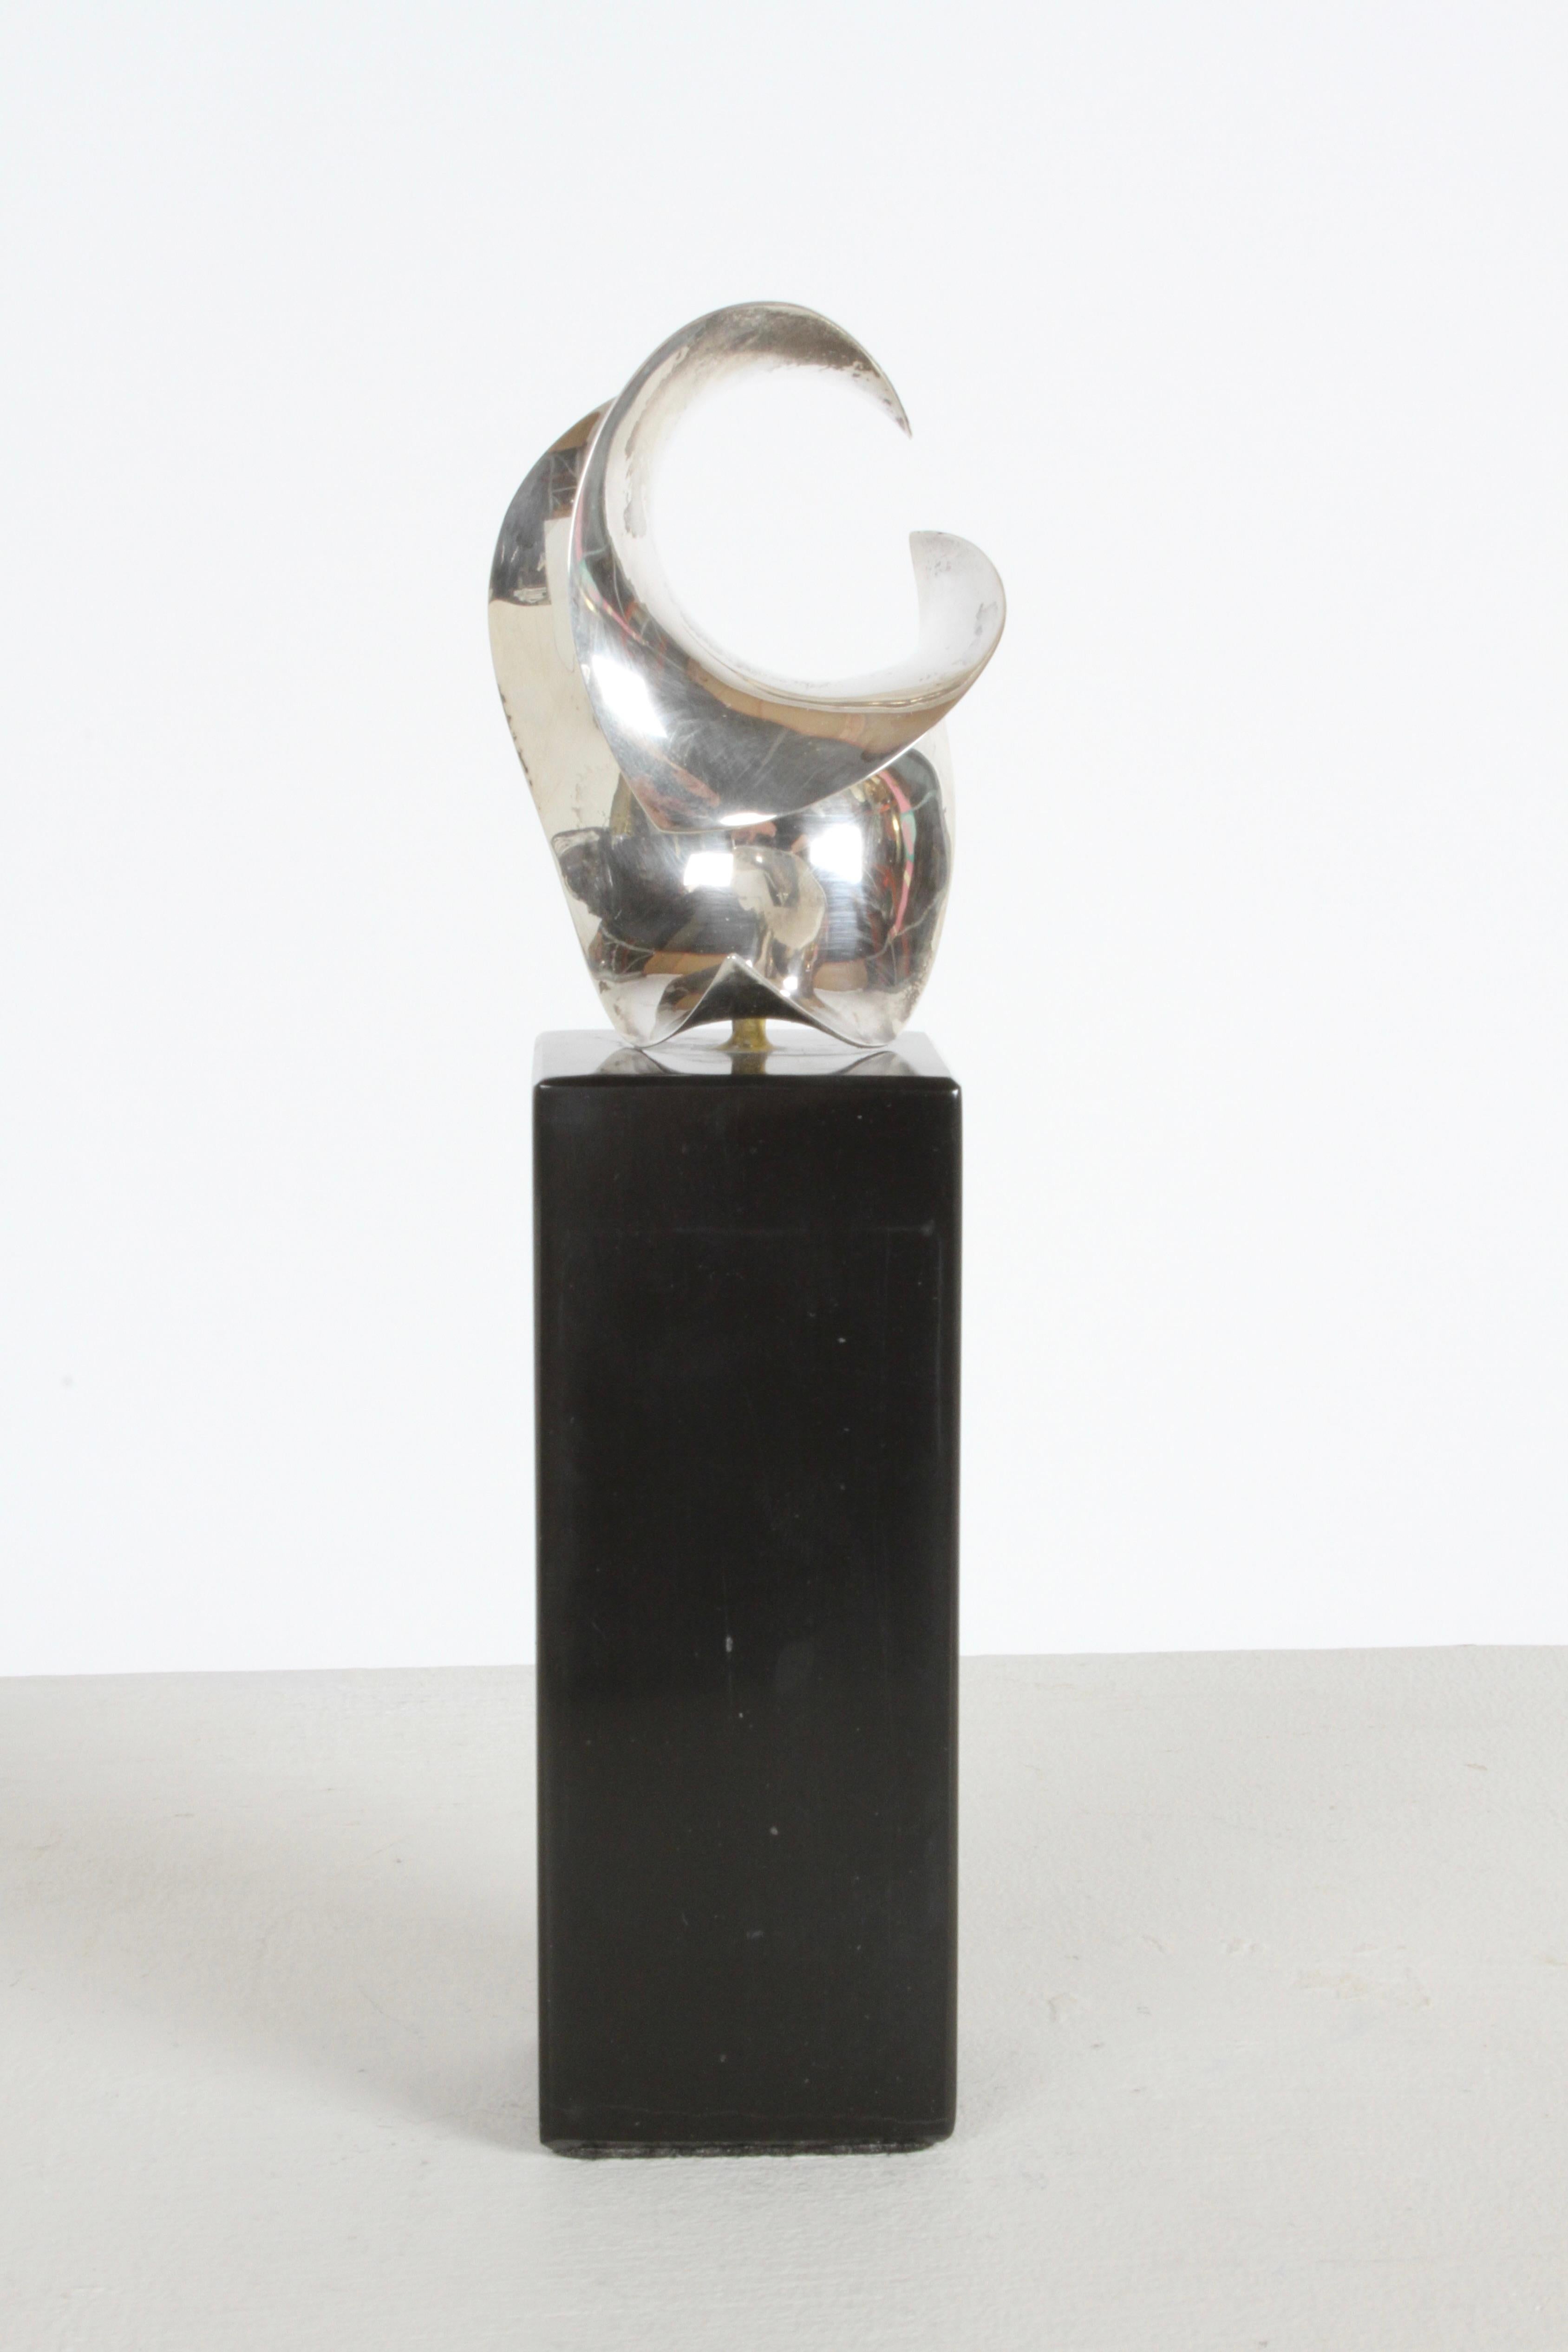 Sculptor and Jewelry Designer Michael Good designed and hand formed this sterling silver Hyperbolic Paraboloid sculpture on black marble base. Signed M.Good 925. In the Mid-Century Modern Style. 

Michael worked with famed Finnish-born American